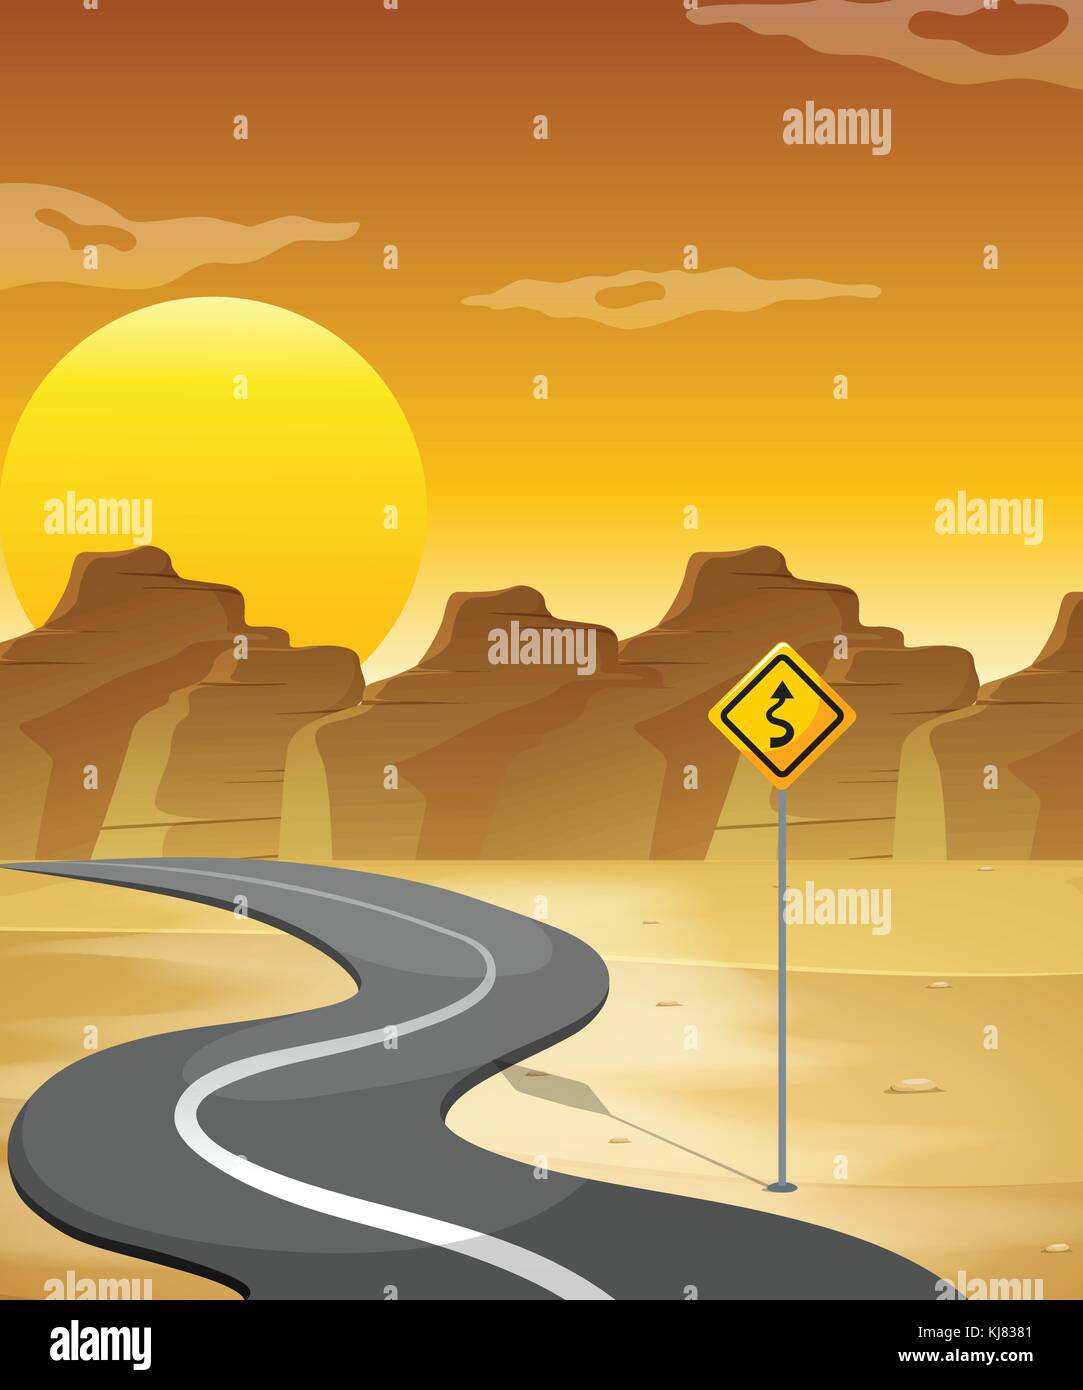 Illustration of a curved road in the desert Stock Vector